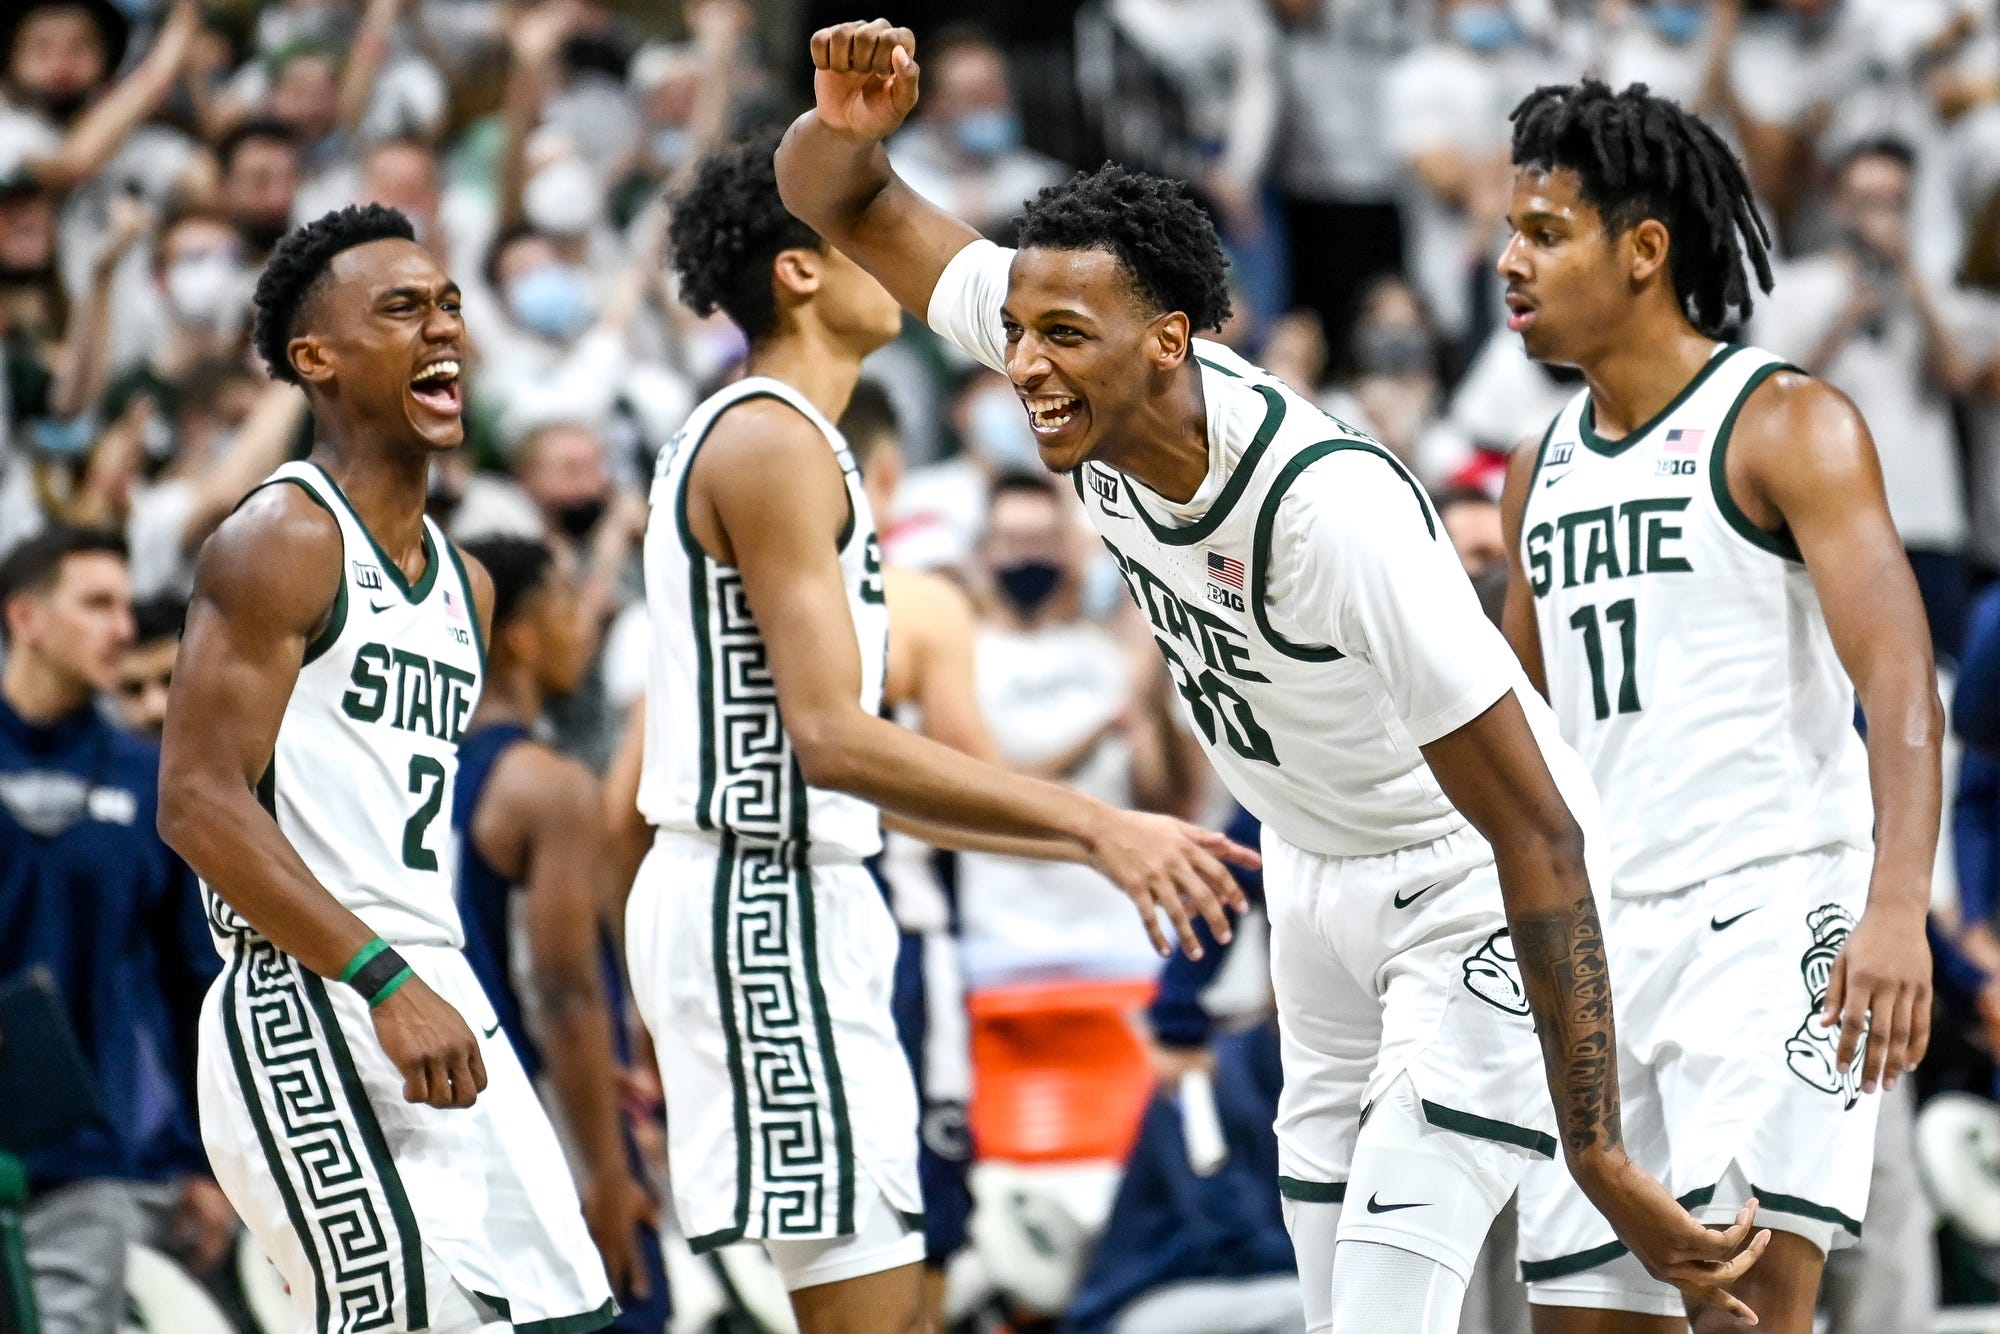 Michigan State basketball player Marcus Bingham Jr. celebrates with teammates in a game against Penn State